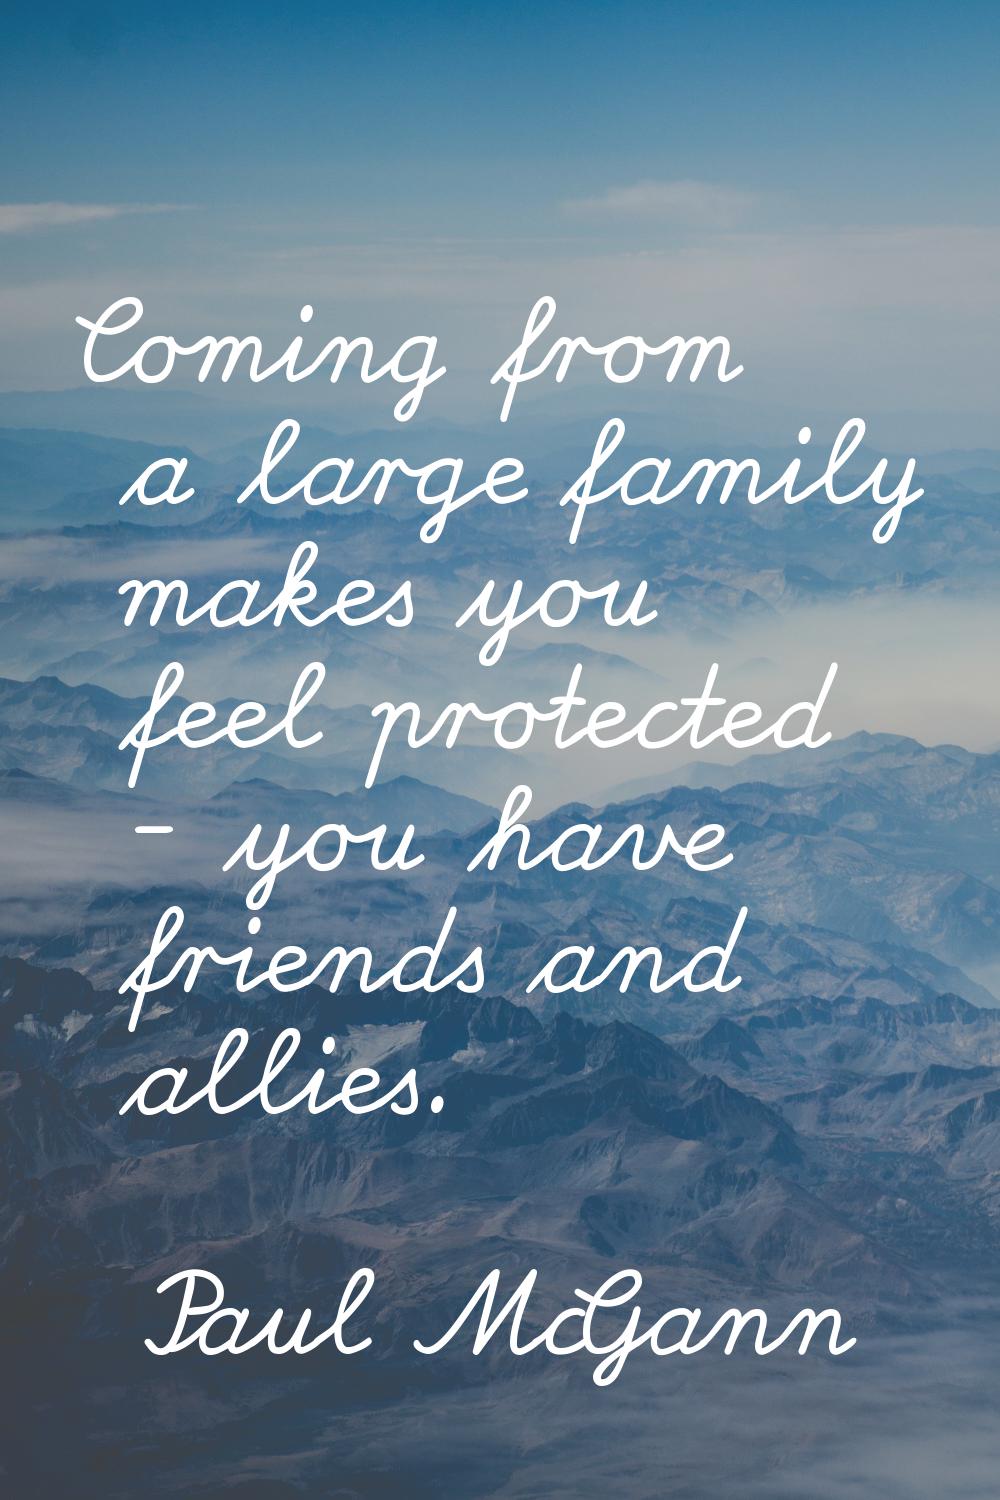 Coming from a large family makes you feel protected - you have friends and allies.